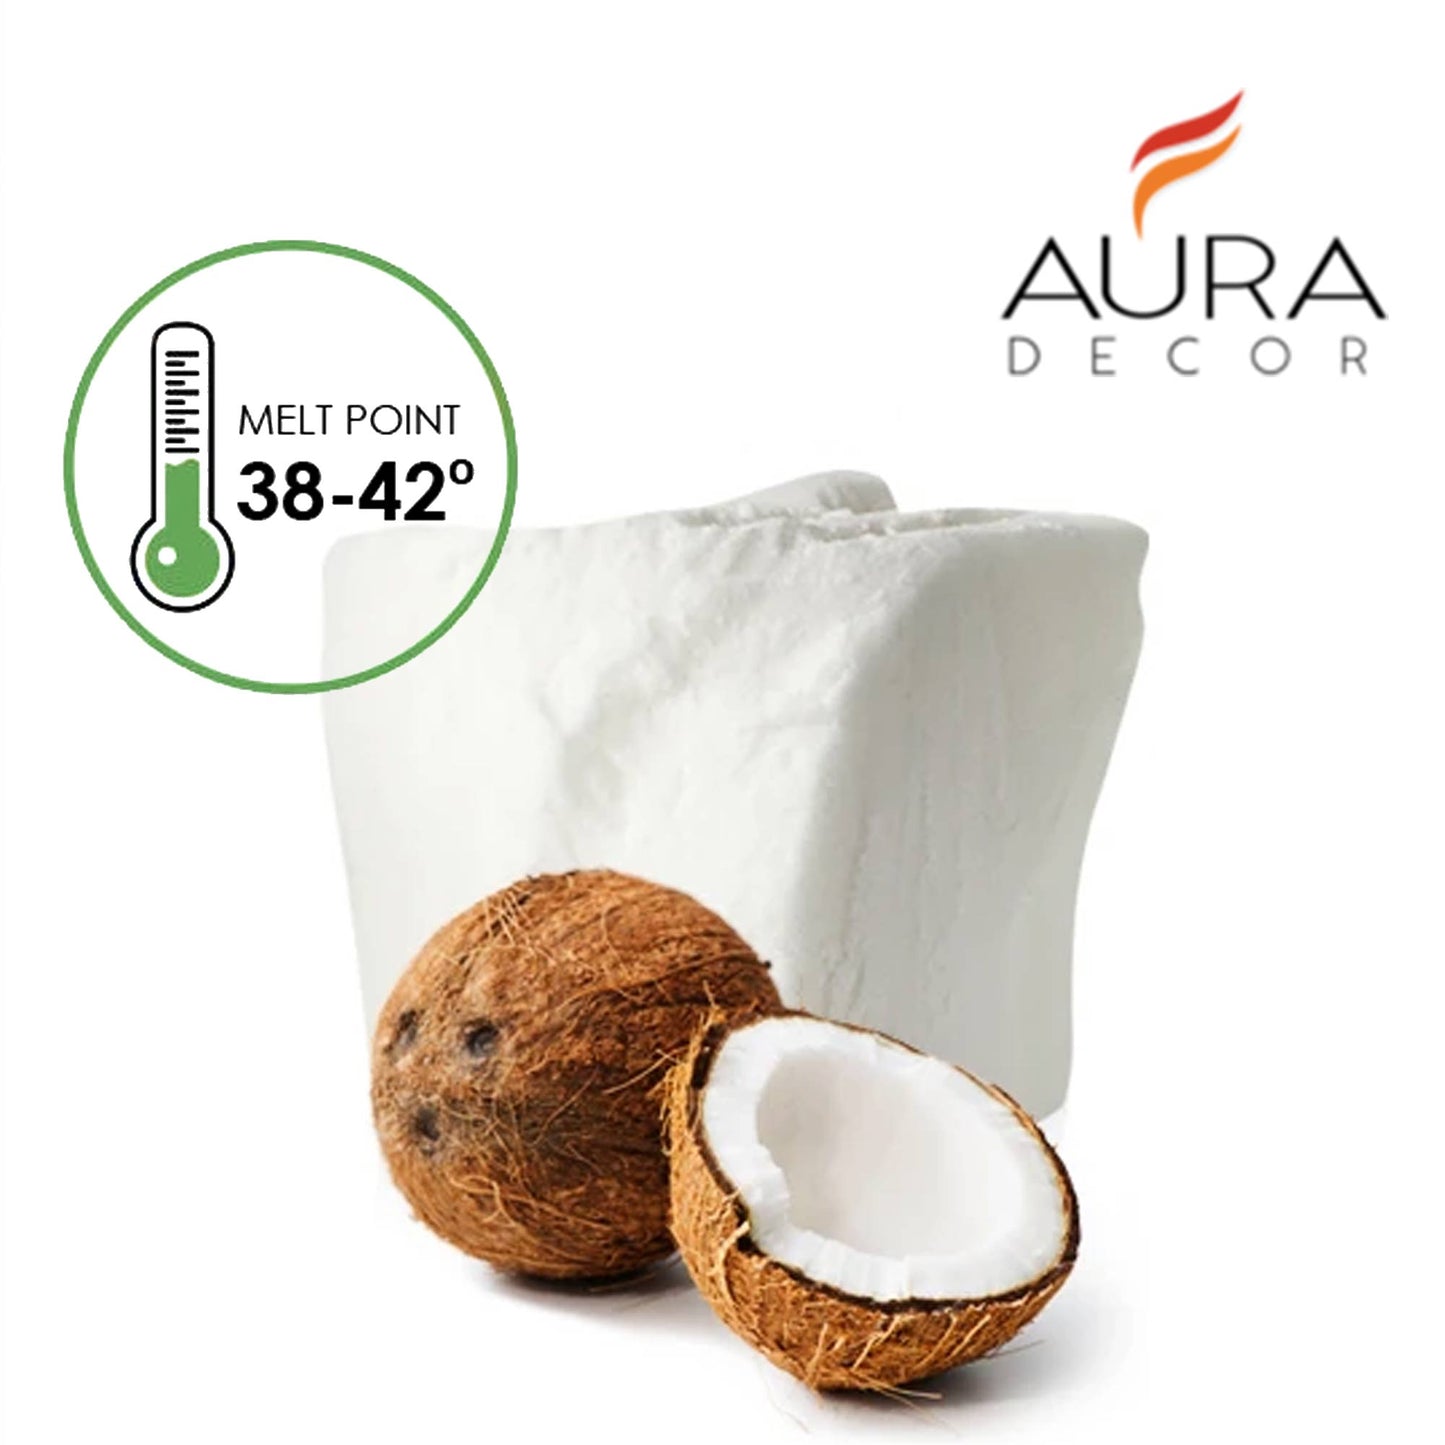 Auradecor Coconut Wax for Candle Making Odourless